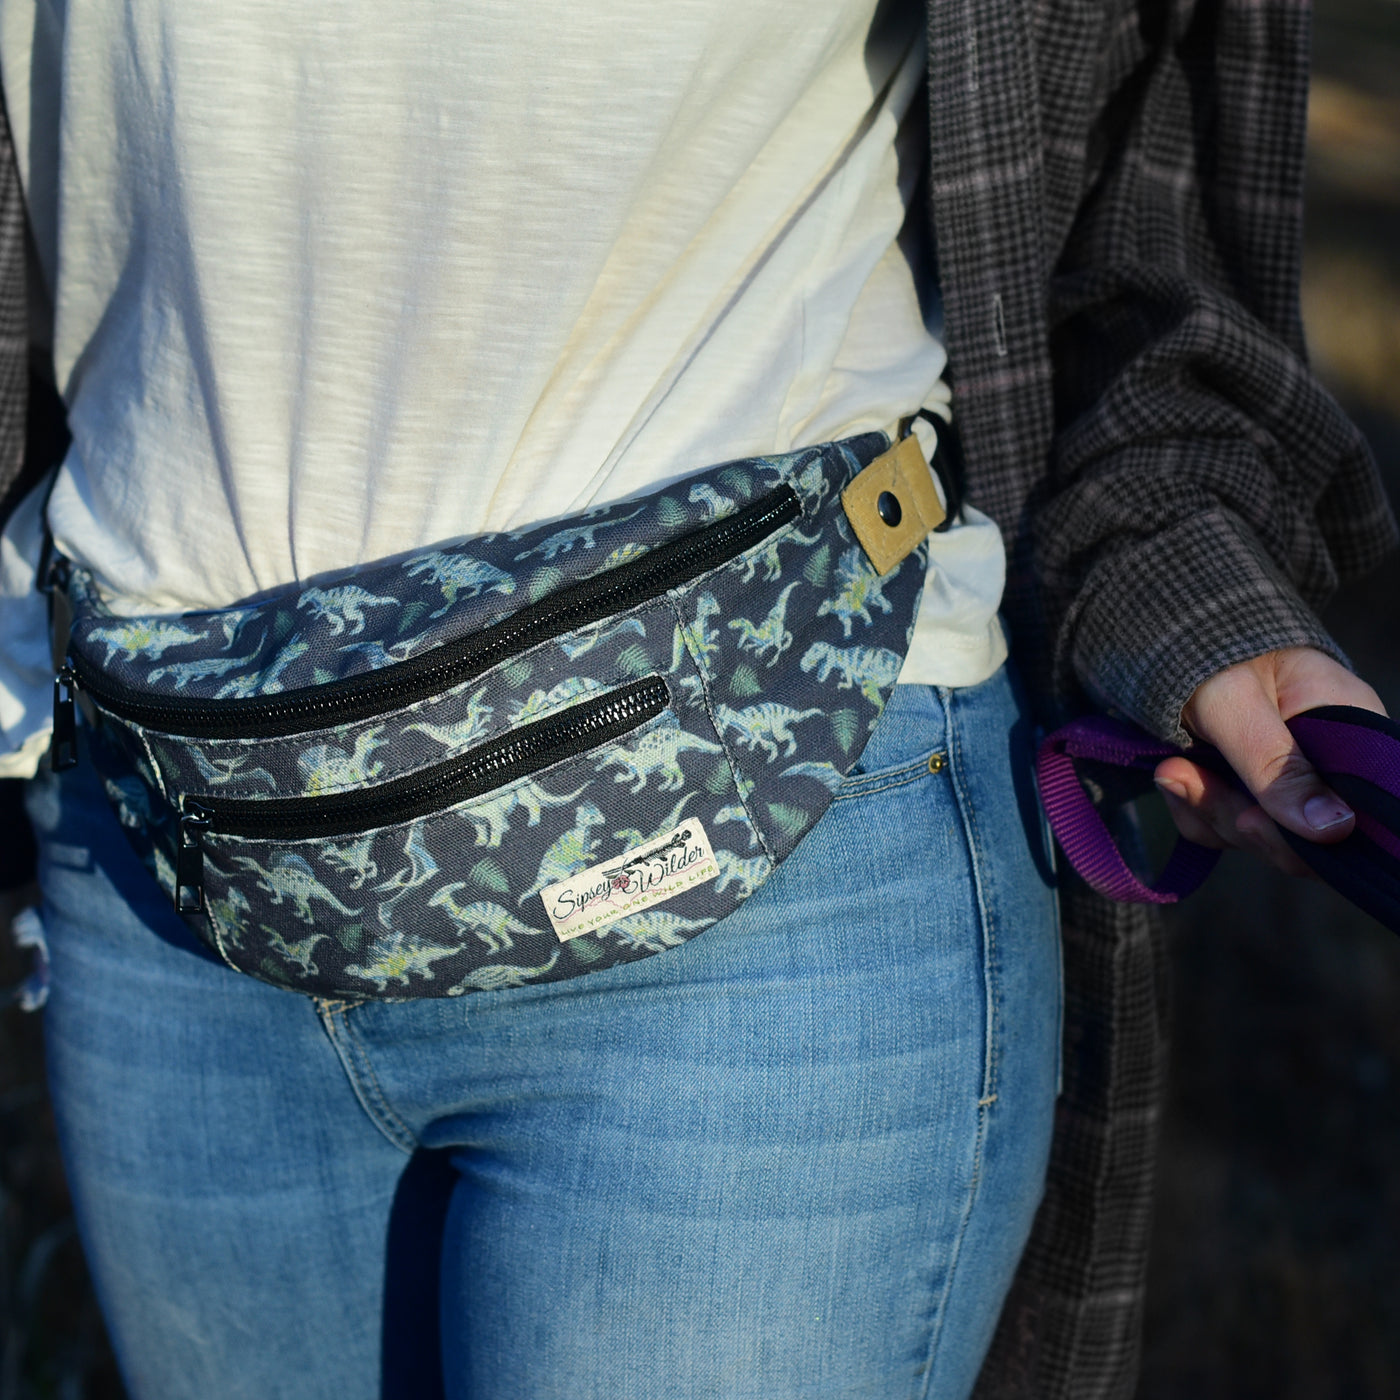 Clever Girl Fanny Pack – Sipsey Wilder